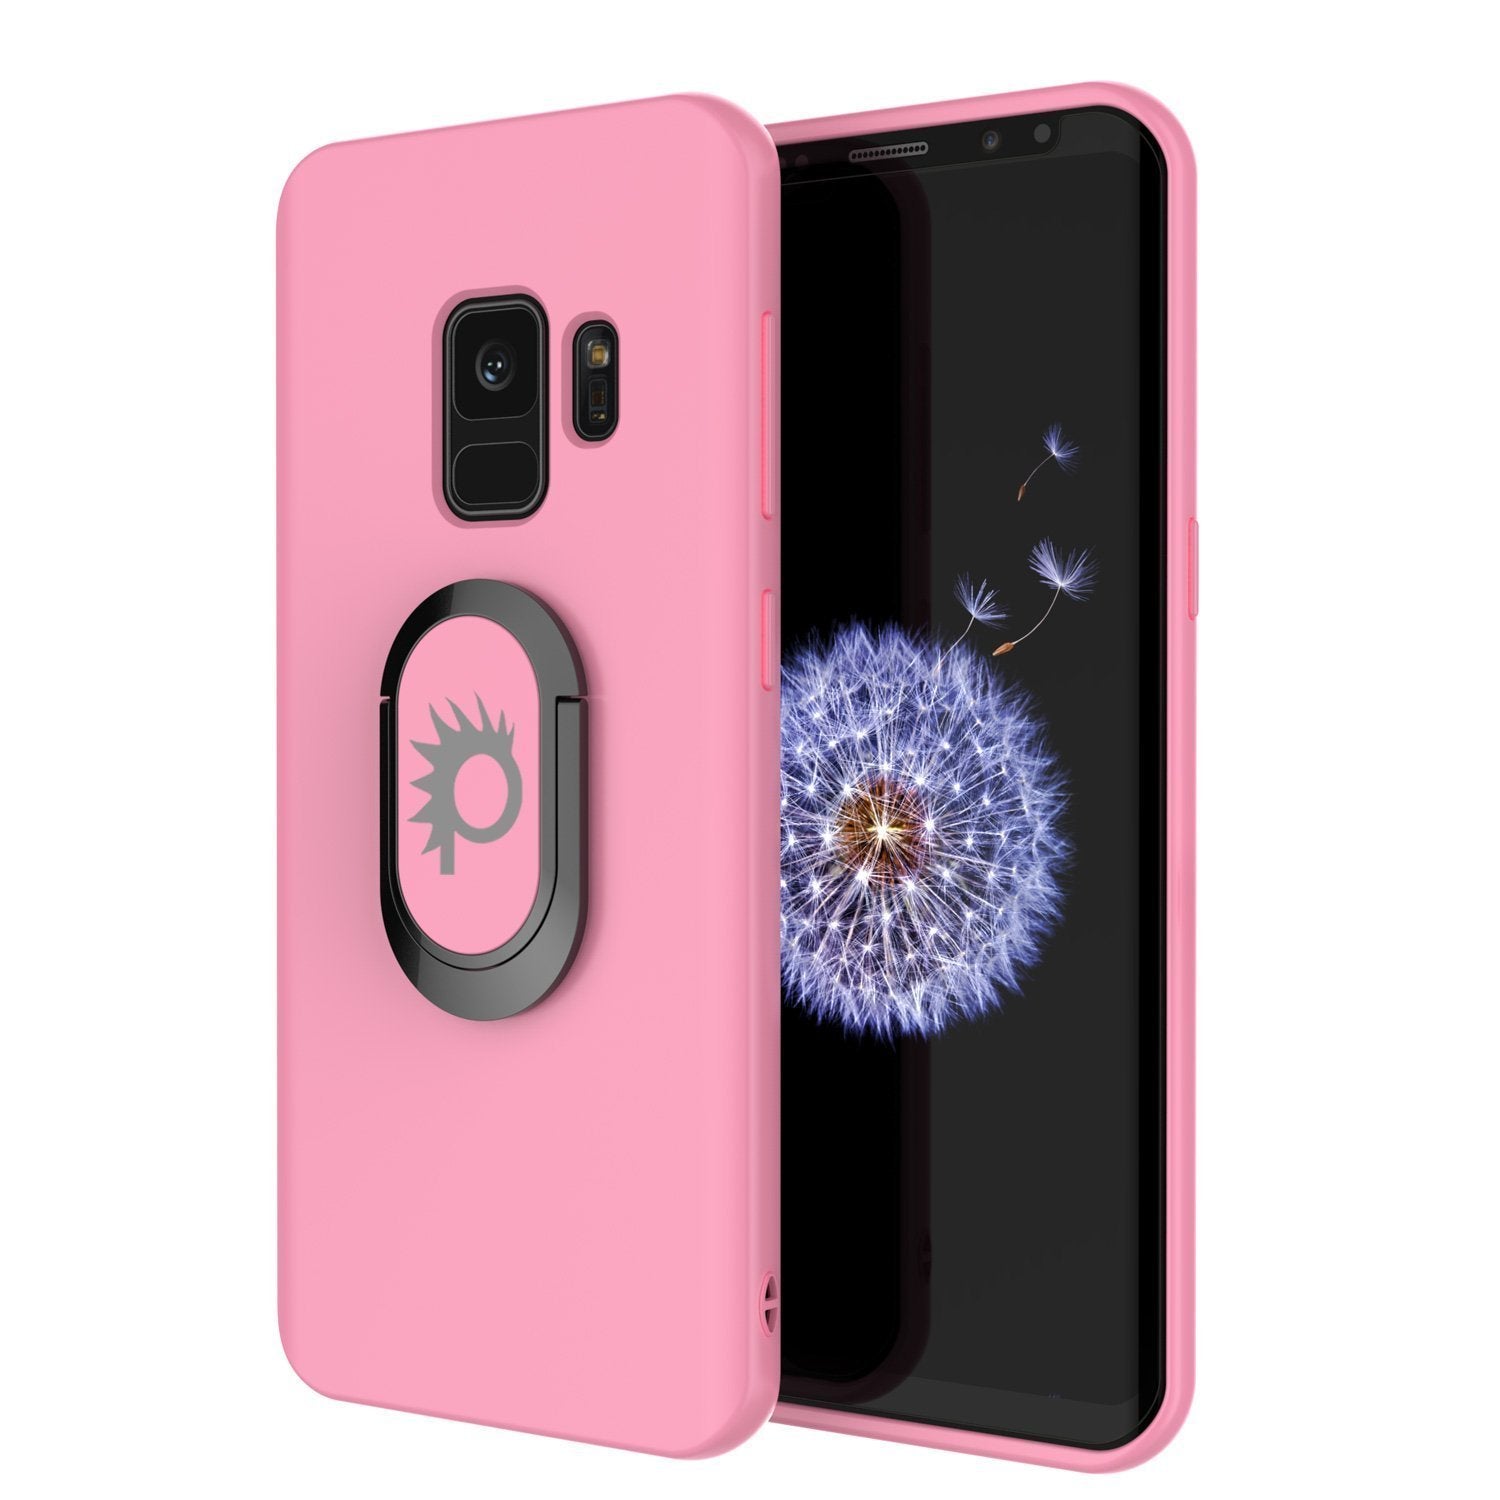 Galaxy S10e Case, Punkcase Magnetix Protective TPU Cover W/ Kickstand, Sceen Protector[Pink]